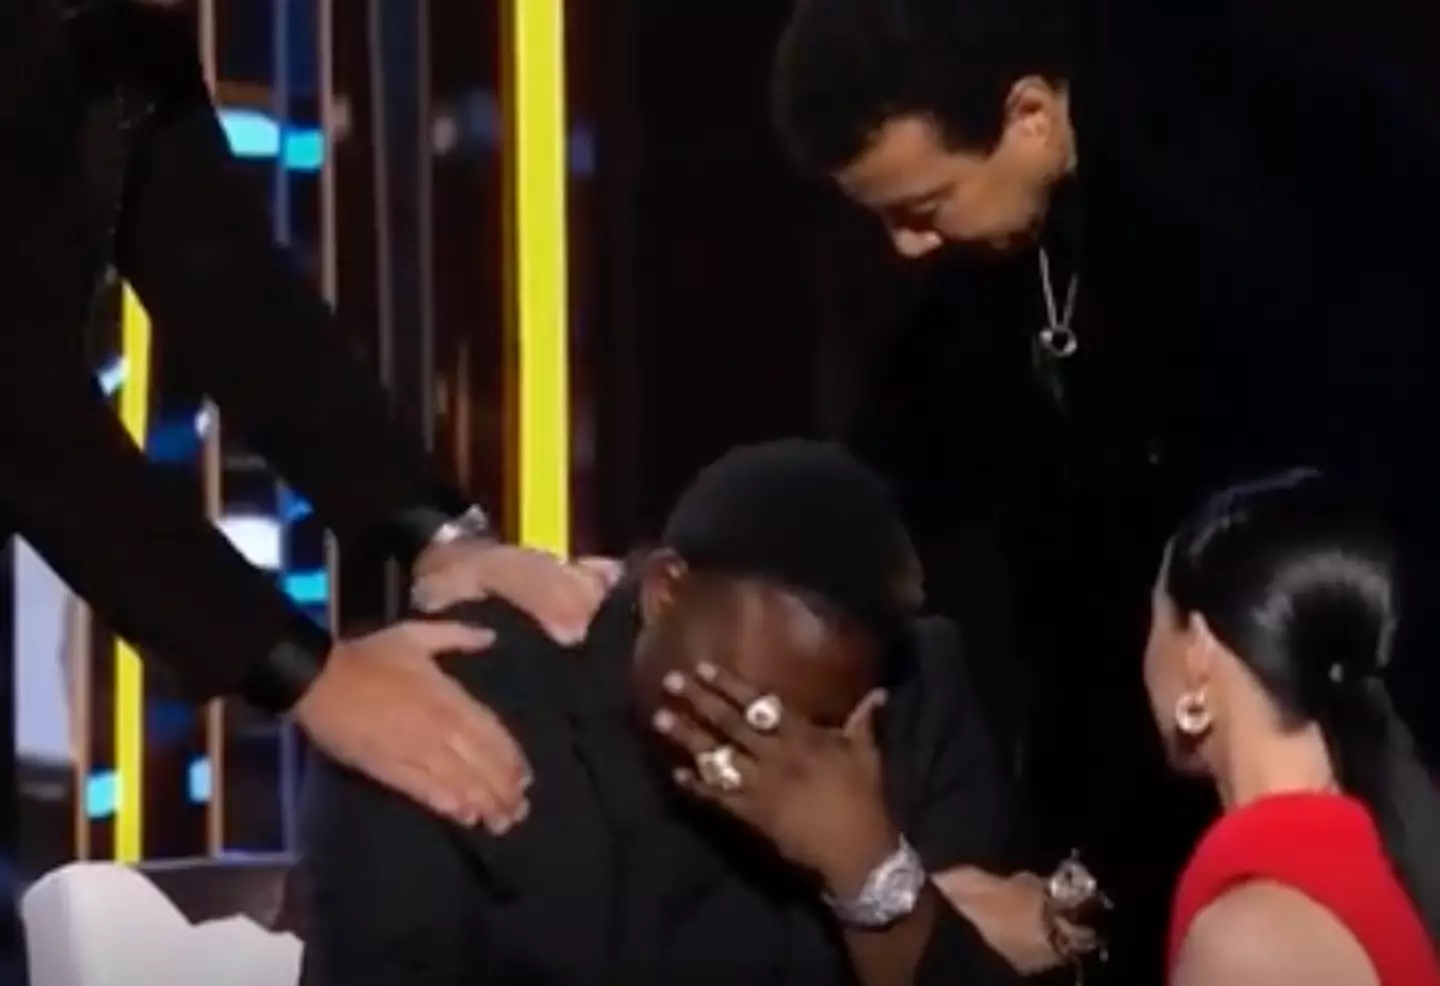 The contestant broke down in tears after the news was announced.